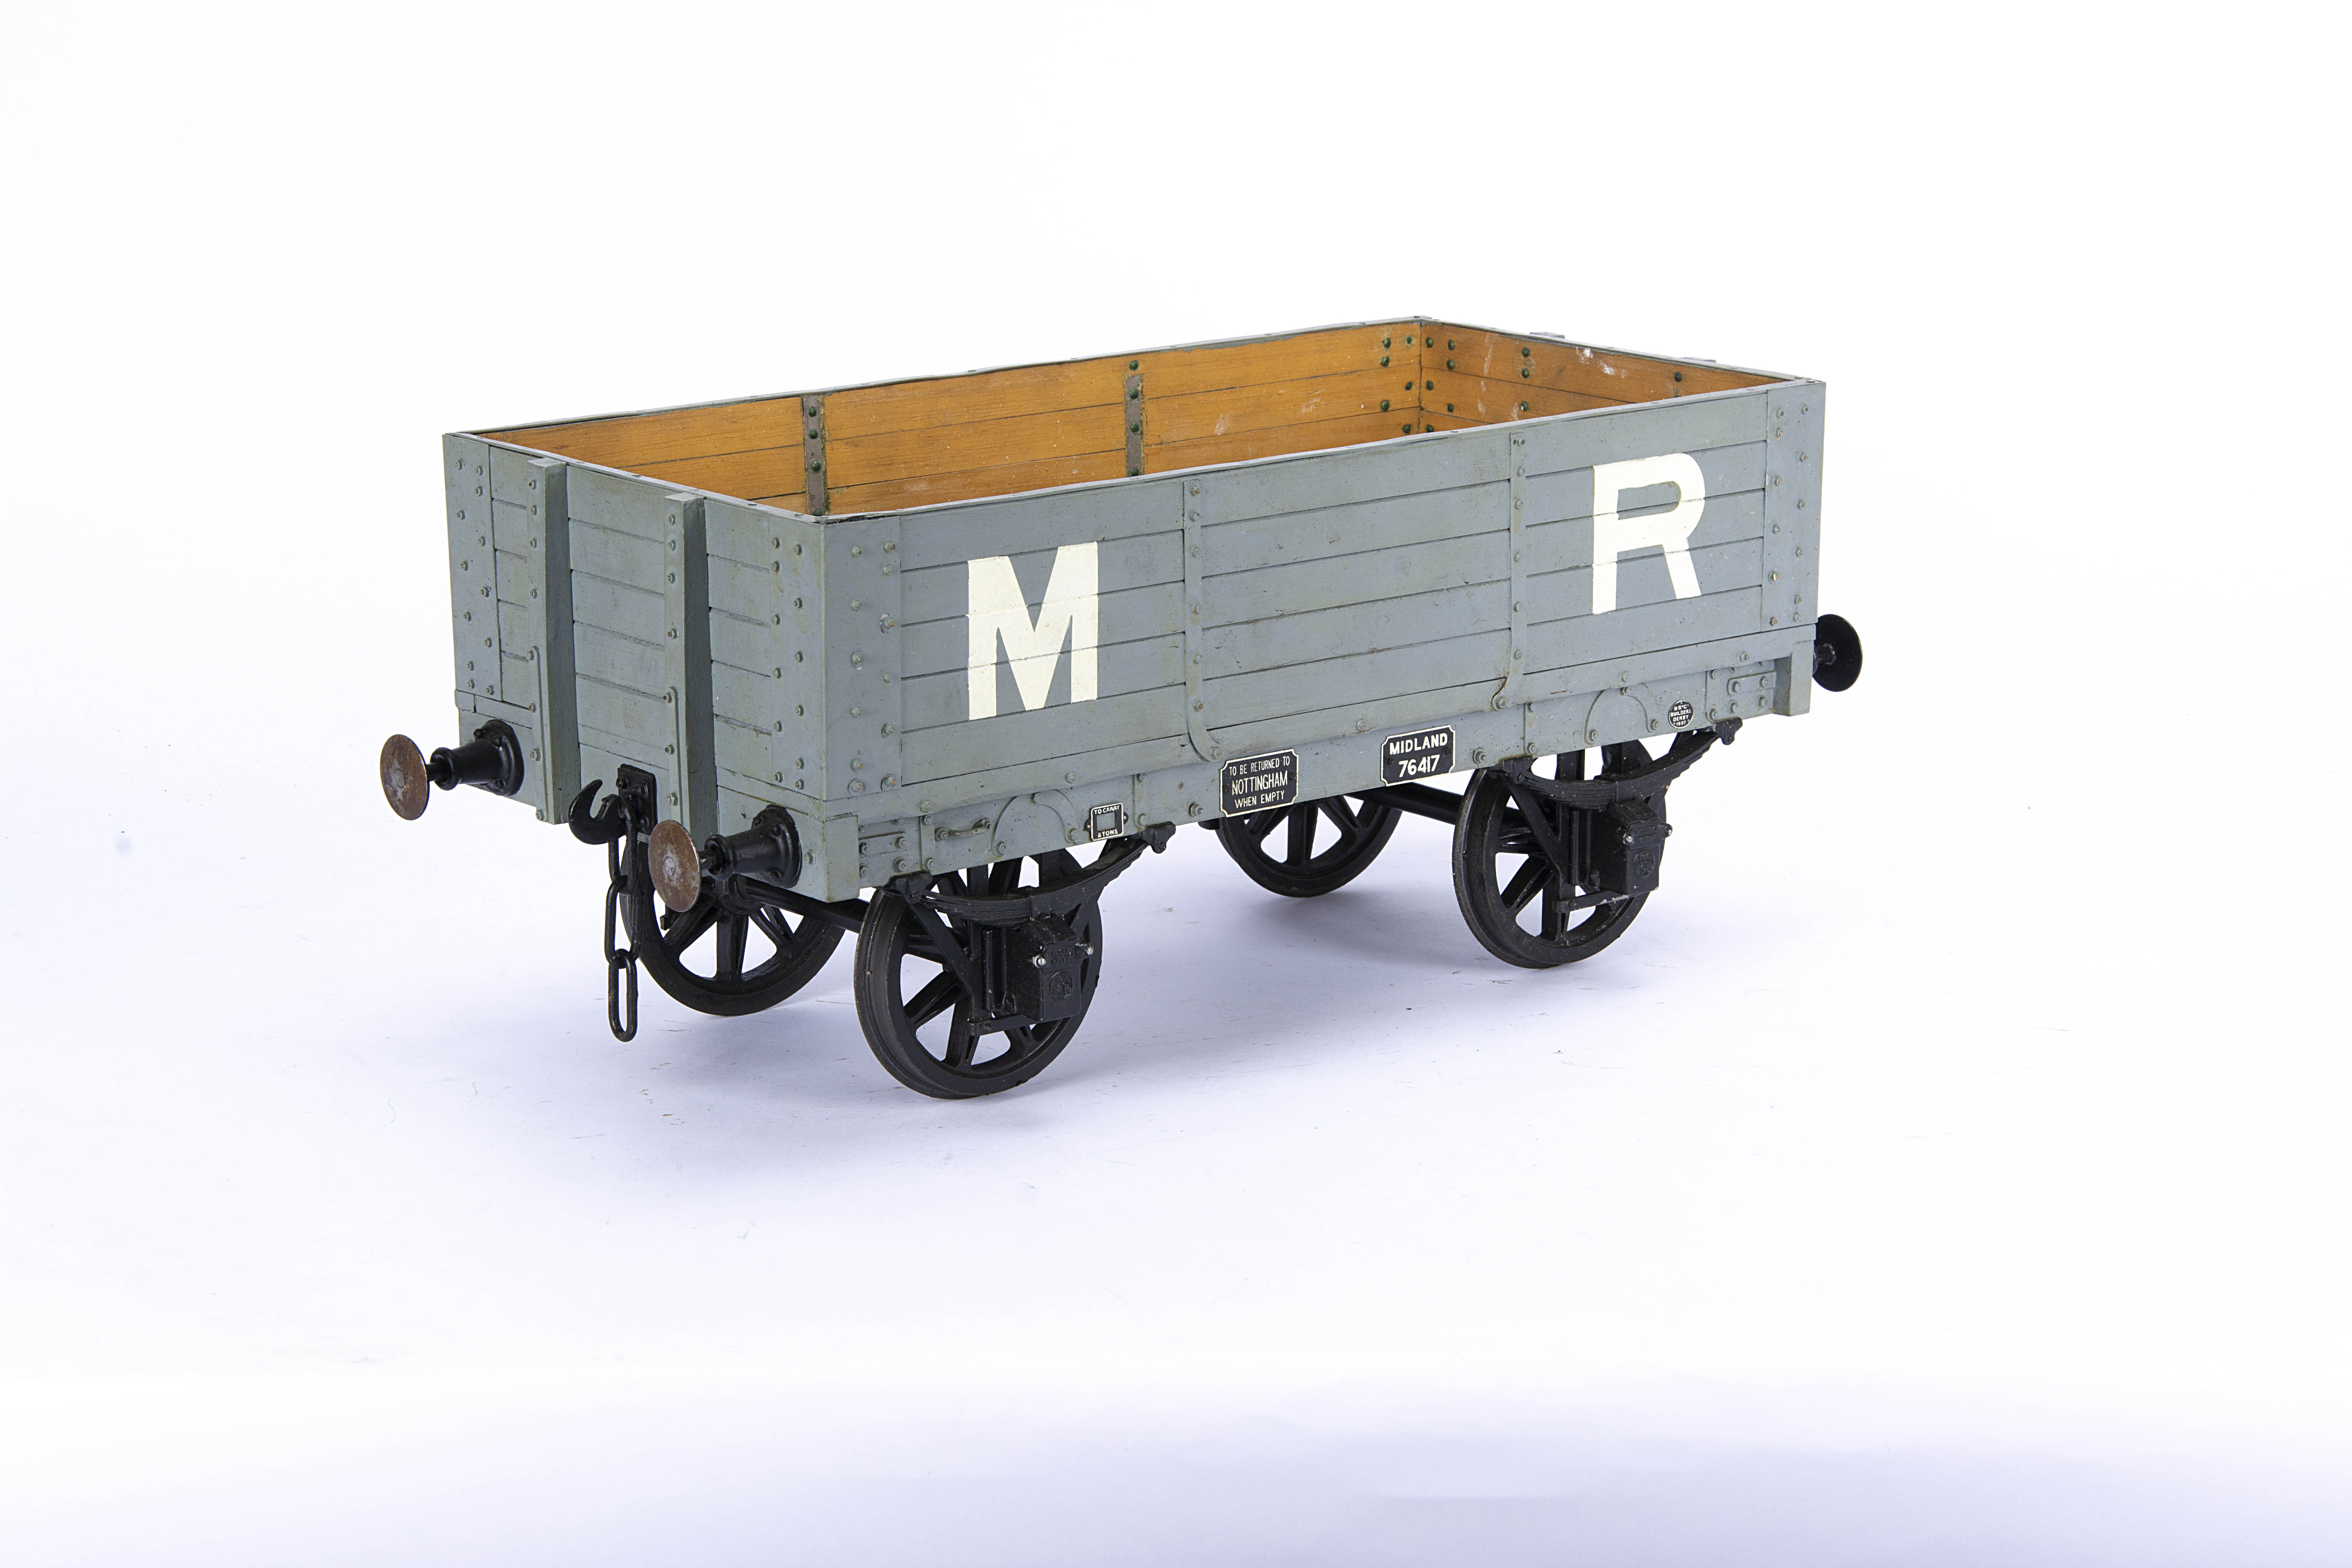 A 5" Gauge Hand-built and exceptionally well-detailed Midland Railway 5-plank Manure Wagon, the